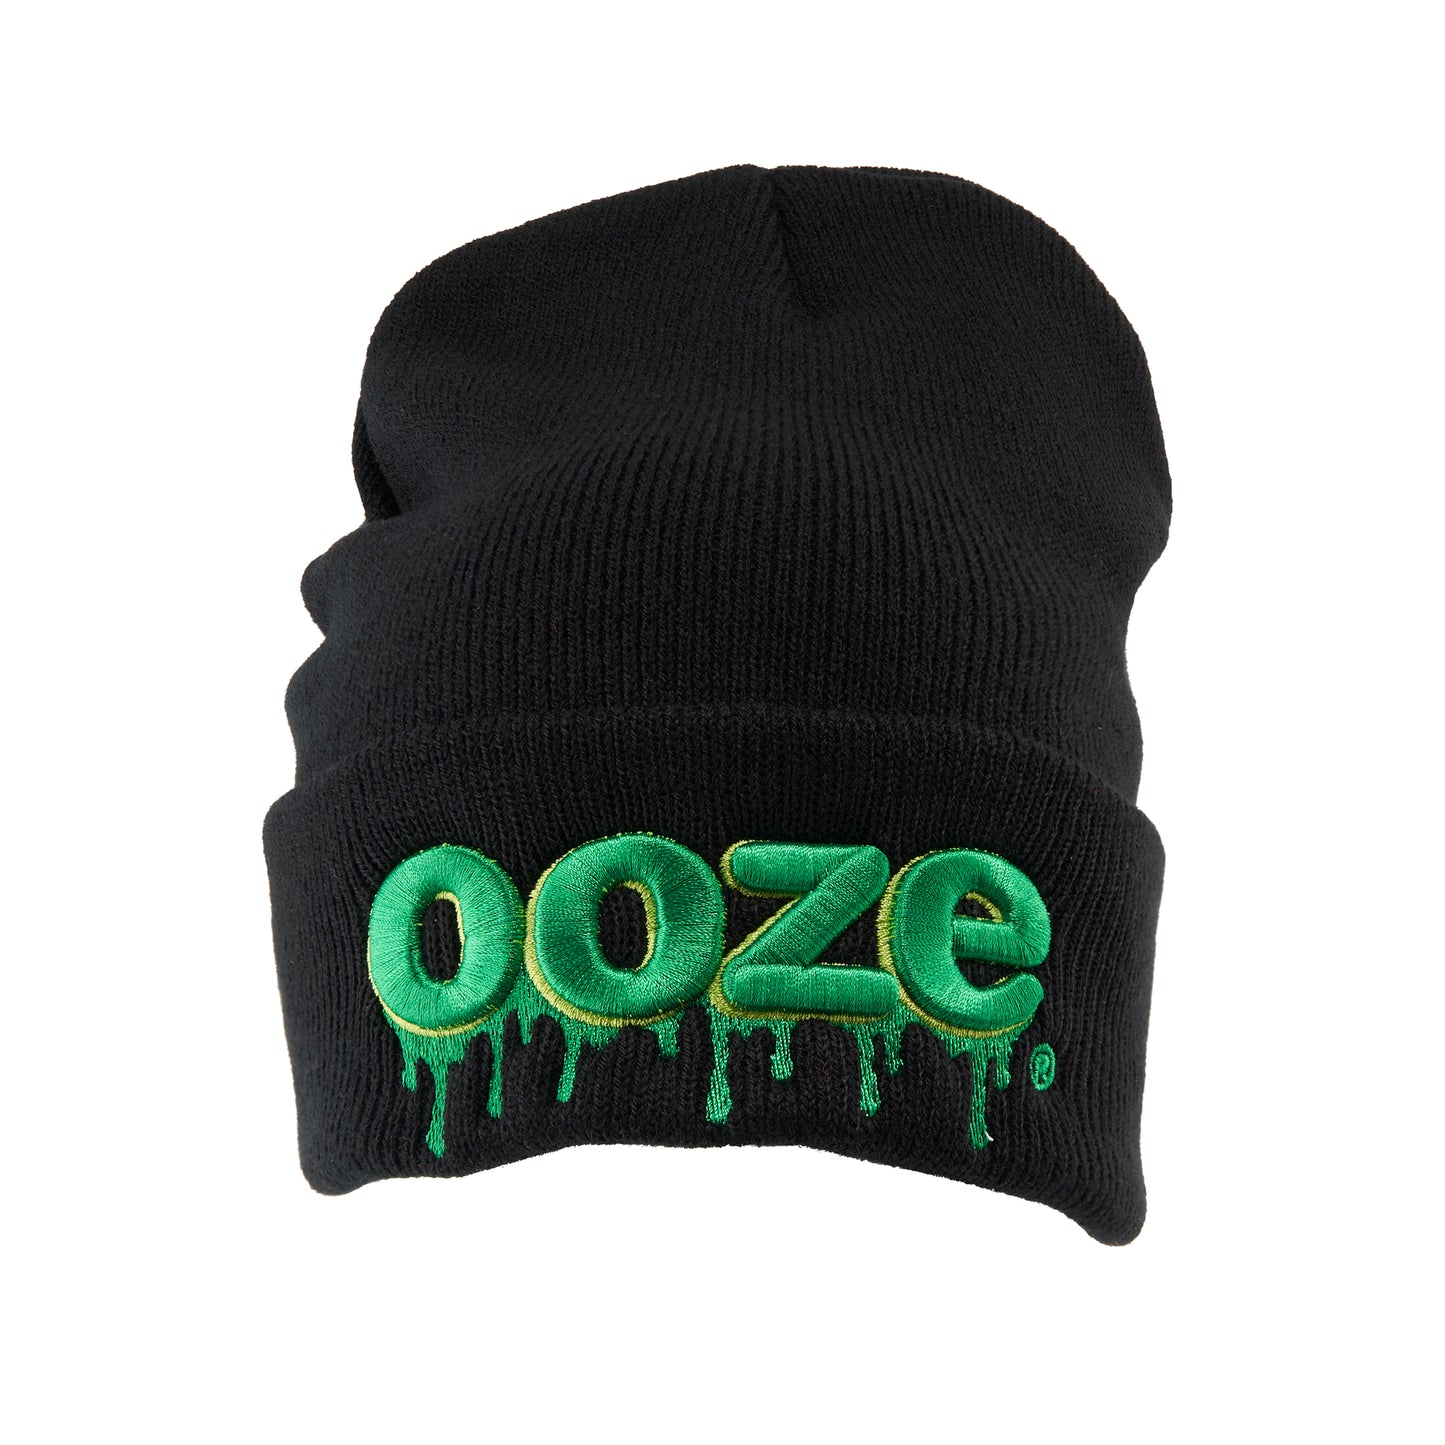 An invisible person is wearing the Ooze black Beanie. It has a wide fold-over part with a big Ooze logo.